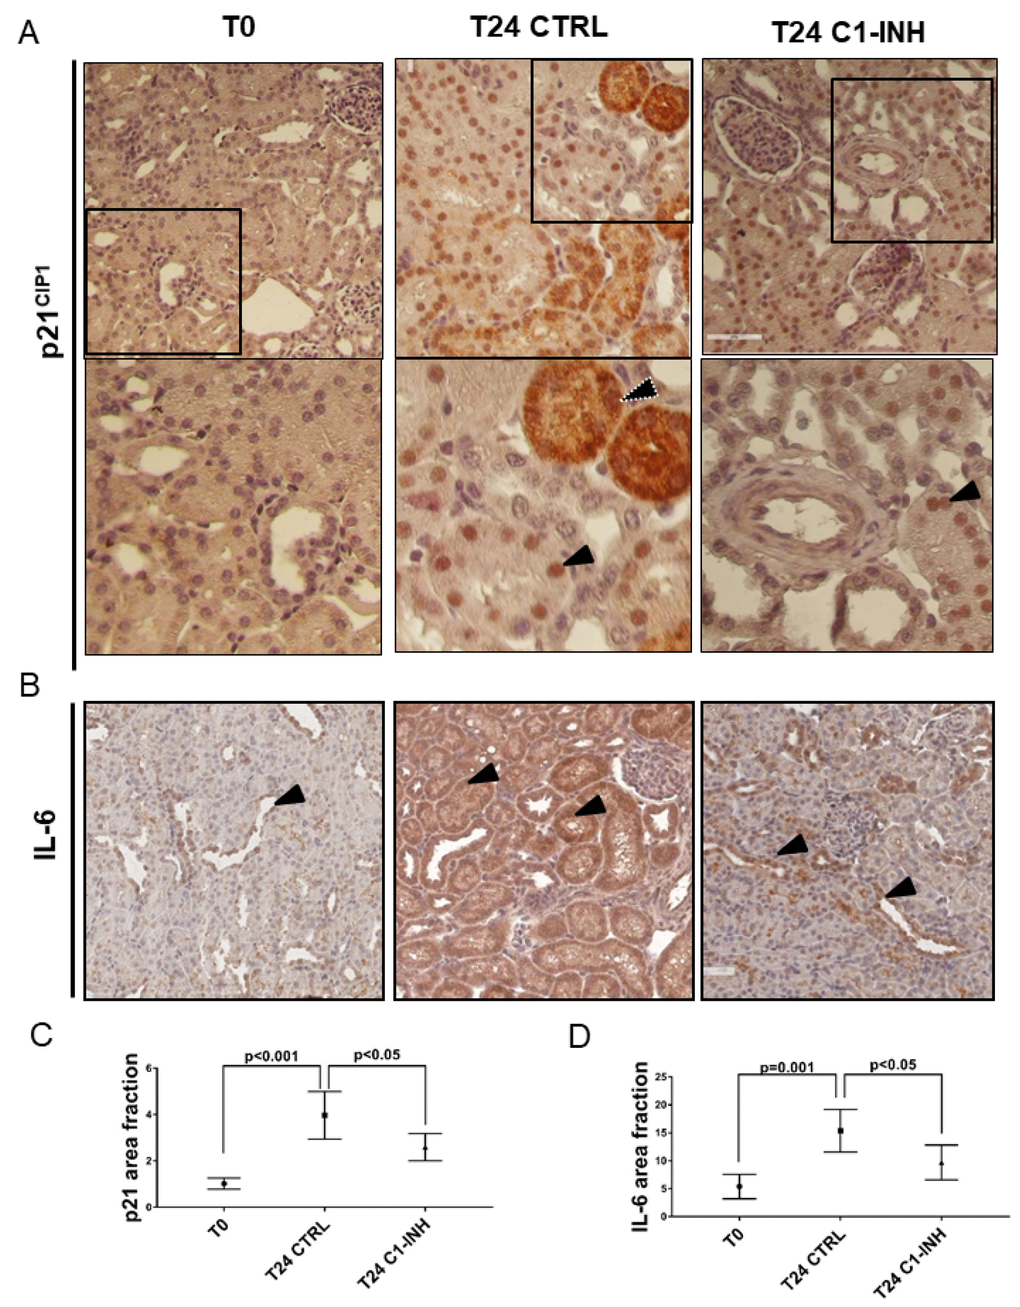 p21 and IL-6 are induced in tubular cells after I/R and modulated by C1-INH treatment. (A) Representative micrographs indicating p21/CIP1 protein expression in different groups of swine after I/R injury, as indicated. Boxed areas are enlarged at the bottom of each micrographs. Compared to T0, biopsies after 24h from reperfusion (T24 CTRL) showed increased nuclear (black arrow) and cytoplasmic staining (white dotted arrow). C1-INH treatment restored p21 at basal expression; limiting the cytoplasmic p21 expression. (B) Representative micrographs show the expression and localization of IL-6, a marker of SASP in T0 (right), T24 CTRL (middle) and T24 C1-INH (right) groups. Arrows indicate positive tubular cells. Compared to T0, biopsies after 24h from reperfusion (T24 CTRL) showed increased IL-6 expression, predominantly at tubular cells. Treatment with C1-INH counteracts IL-6 increase. (C, D) Graphical representation of p21 and IL-6 area fraction in the different groups. (n=5, p value as indicated).